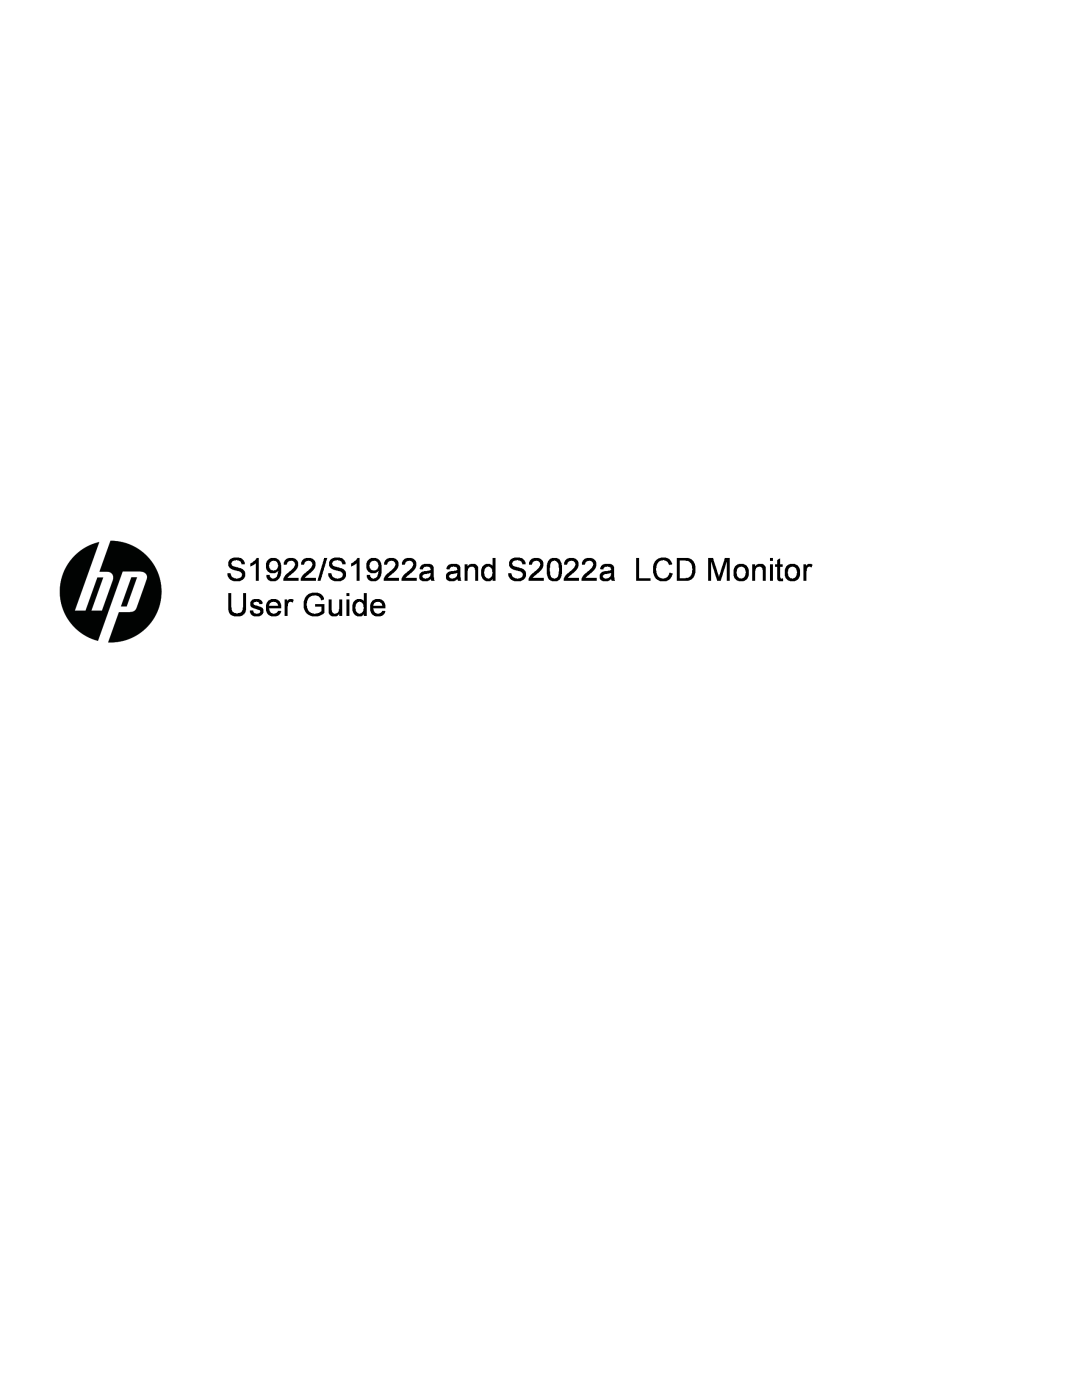 HP manual S1922/S1922a and S2022a LCD Monitor User Guide 